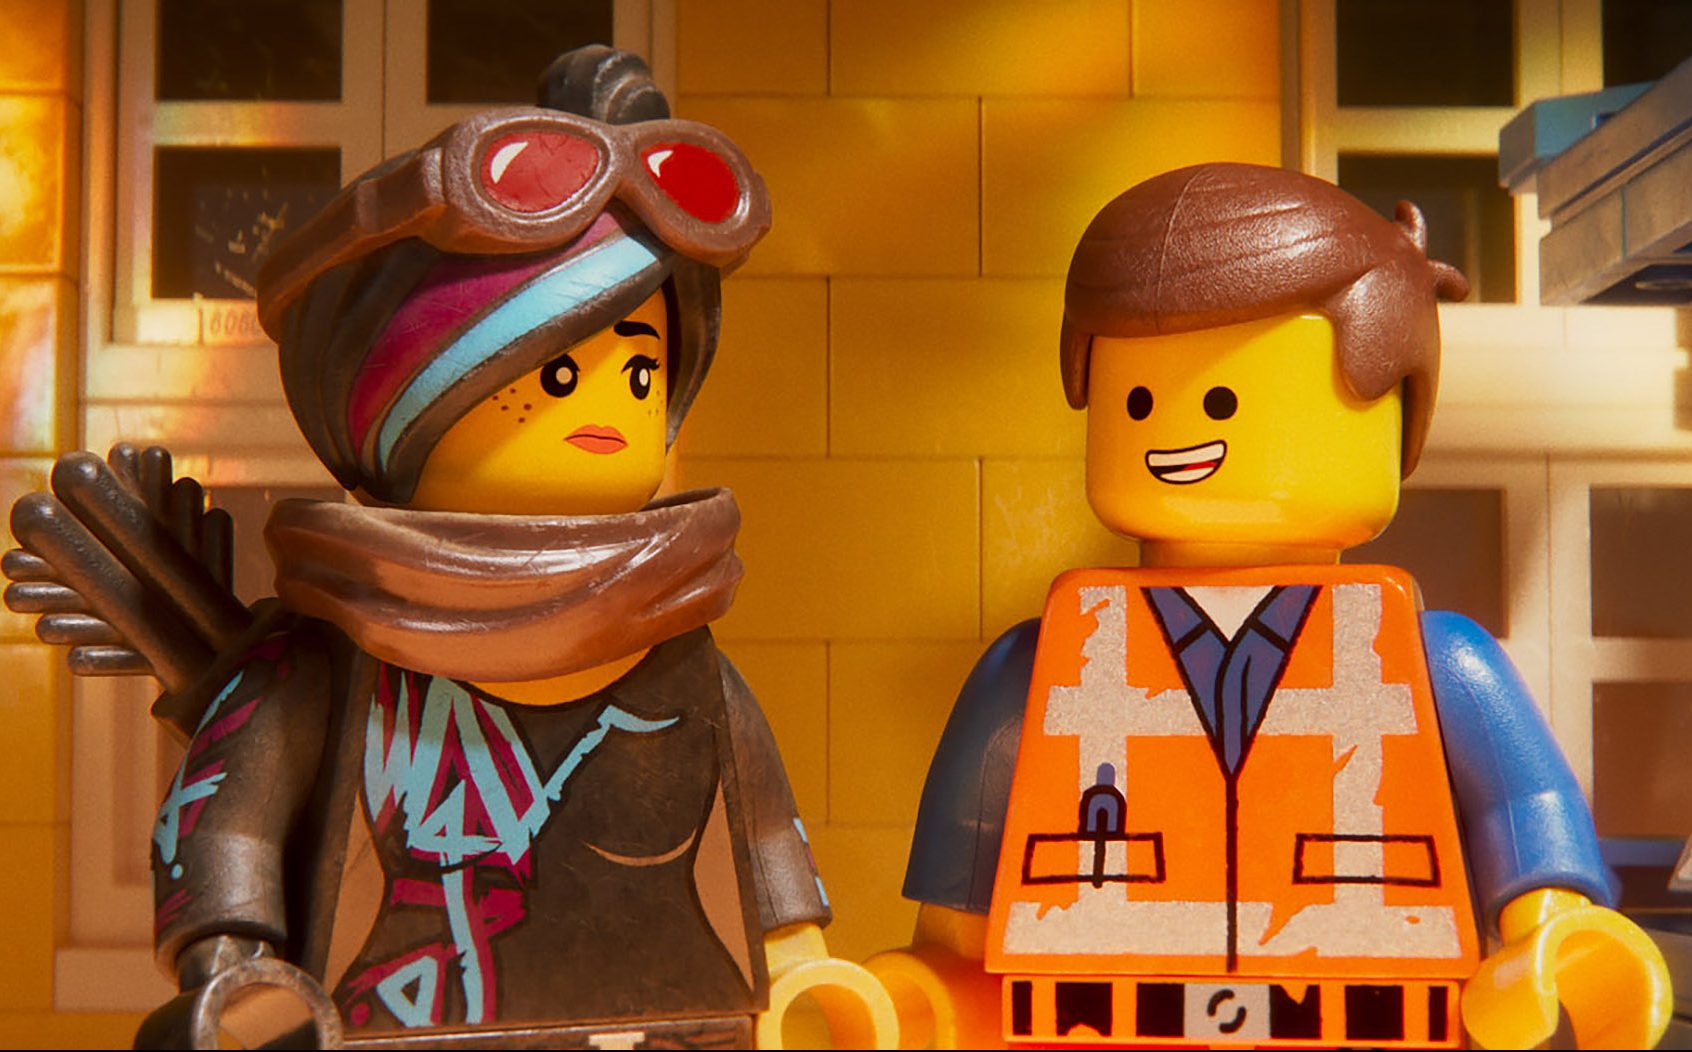 Everything Is NOT Awesome in the "The LEGO 2"